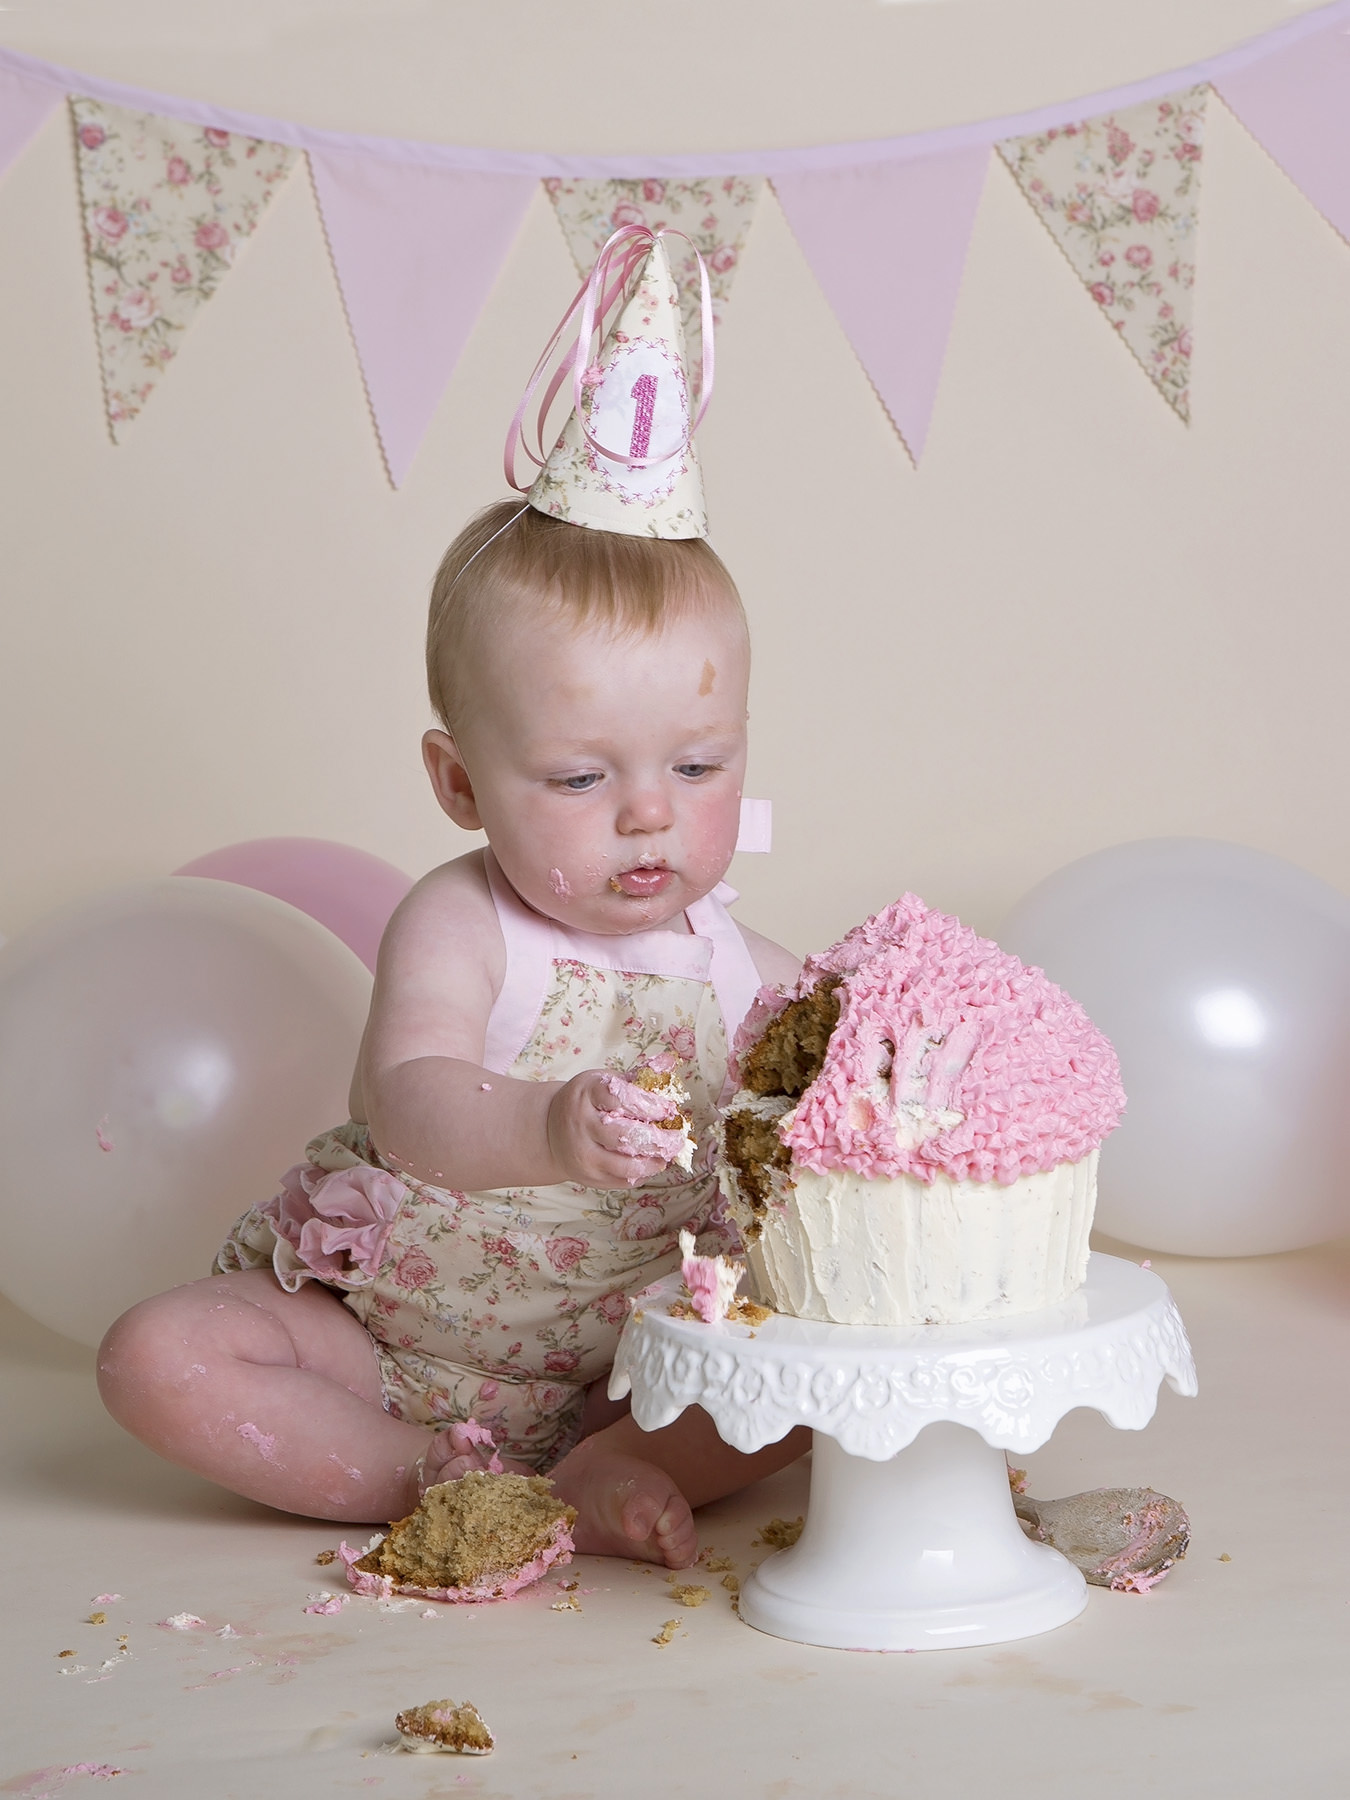 girl in tutu and hat eating cake by cake smash photographer Winchester